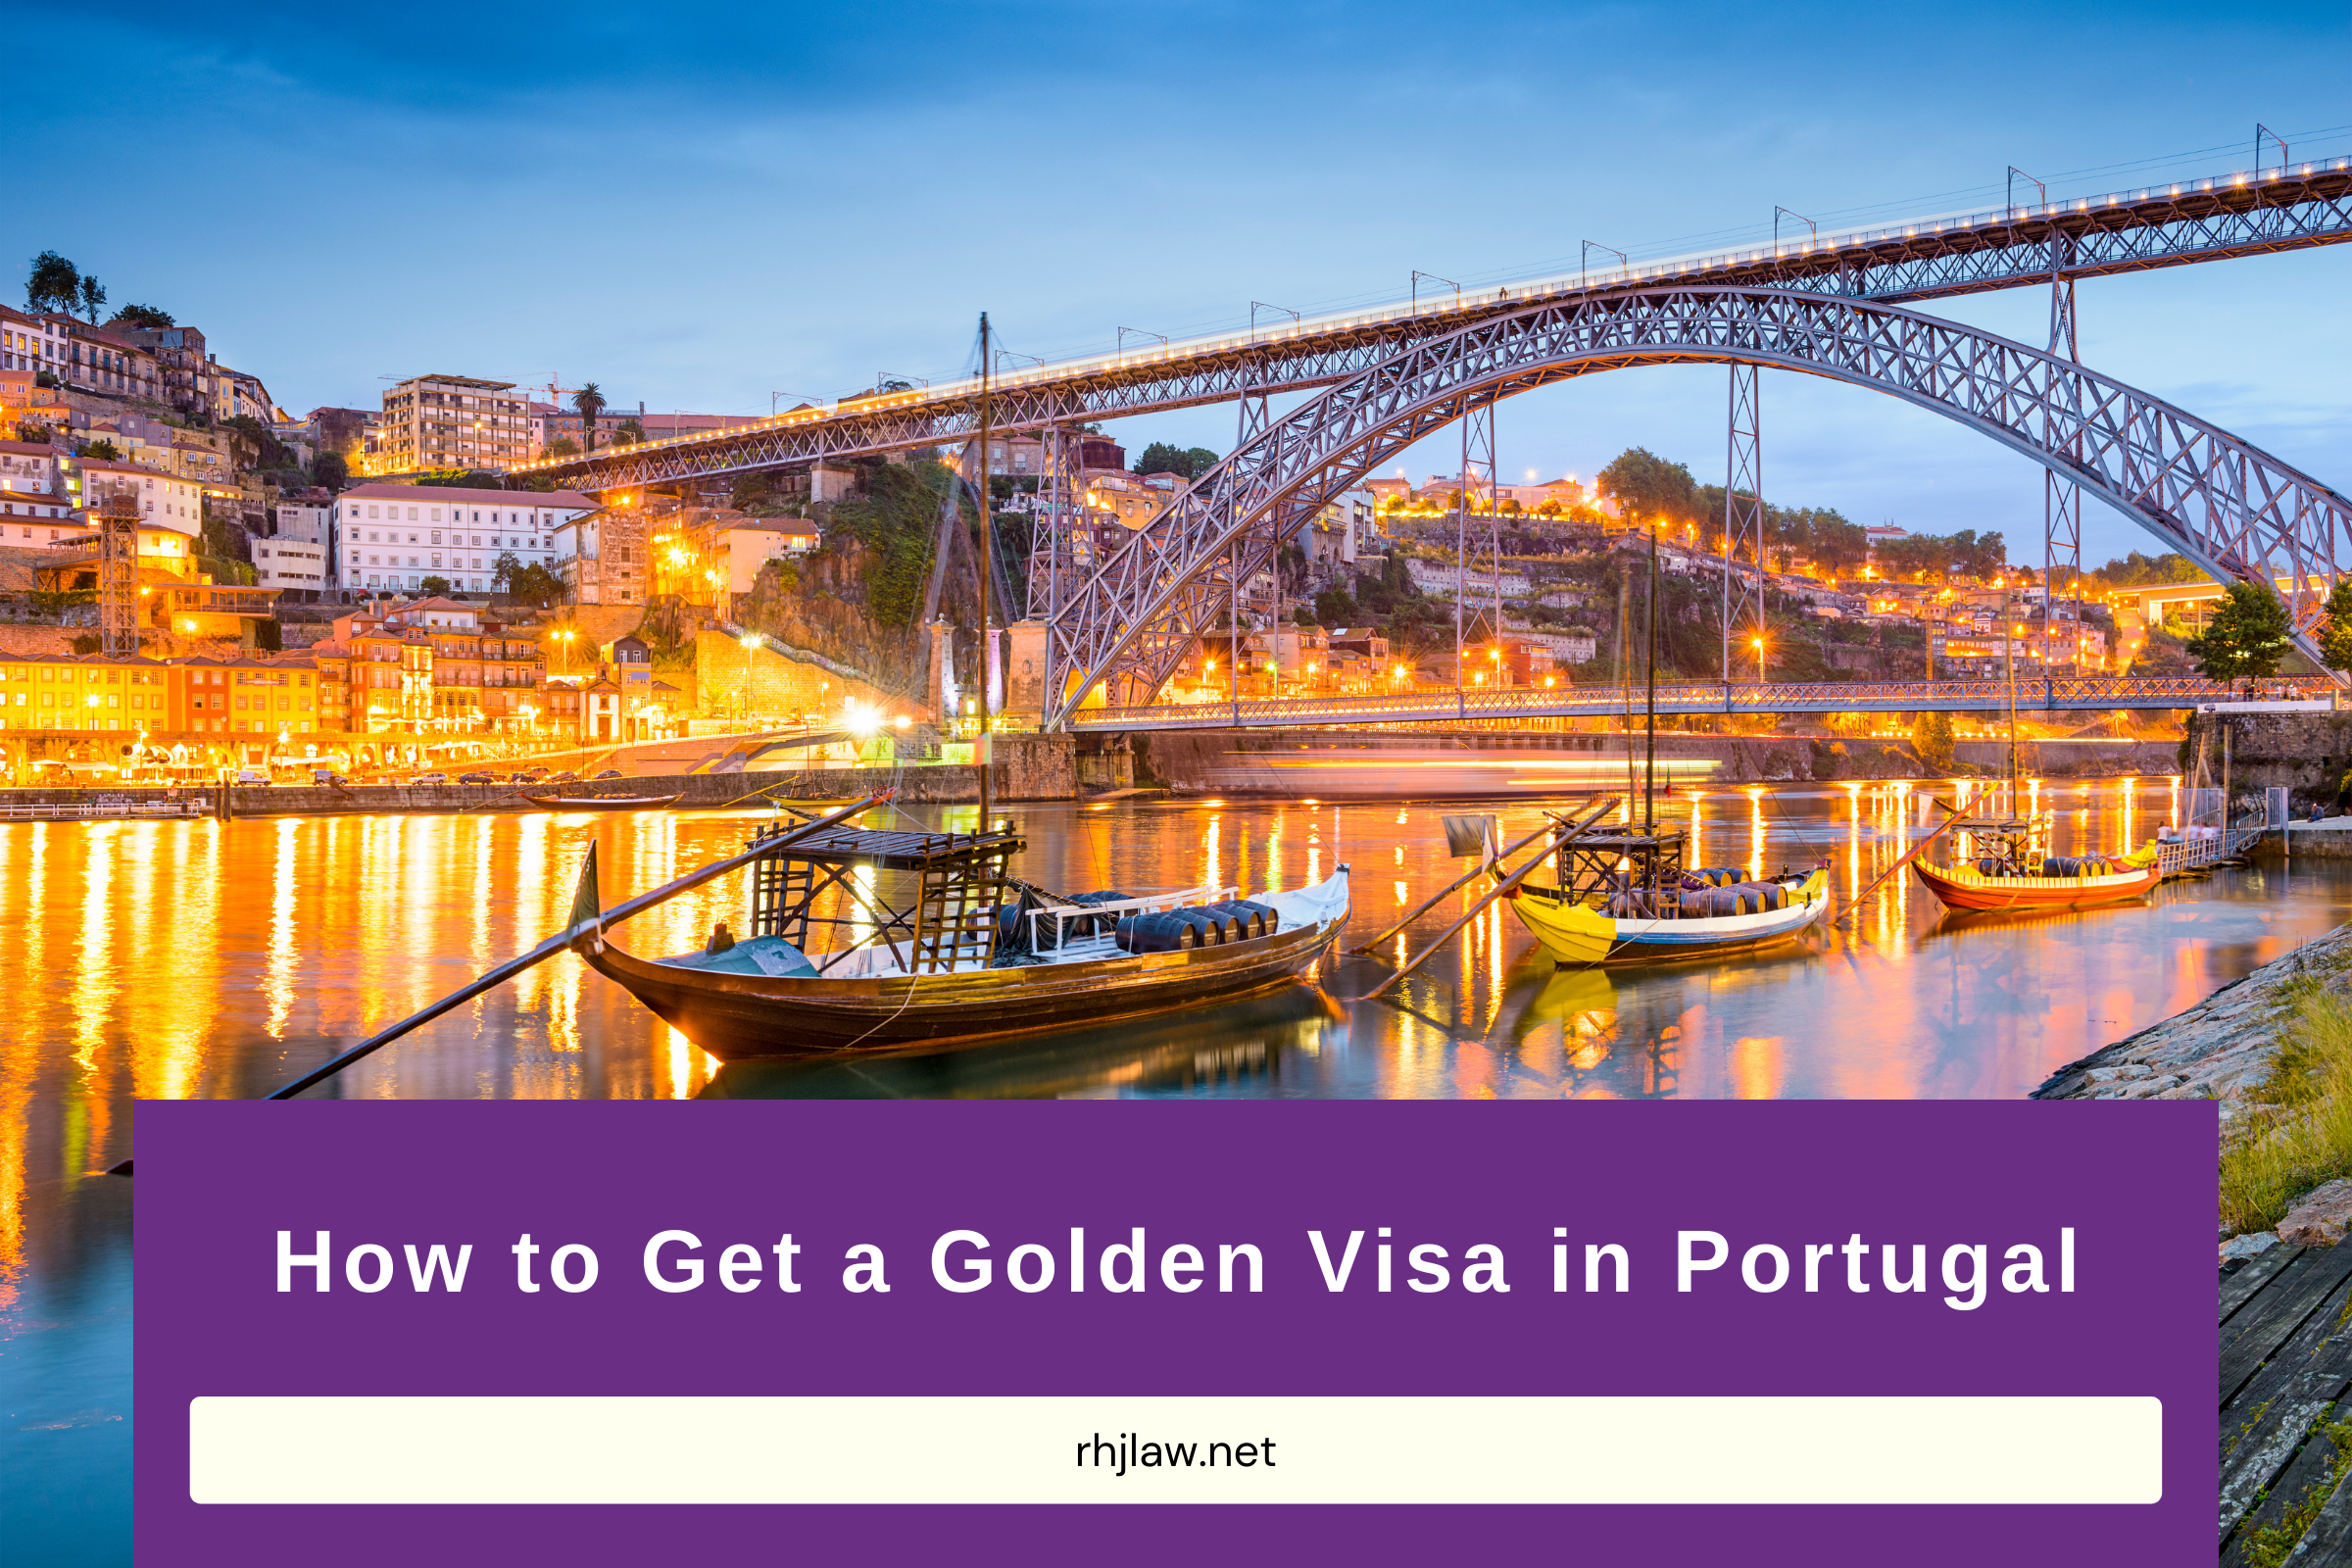 How to Get a Golden Visa in Portugal